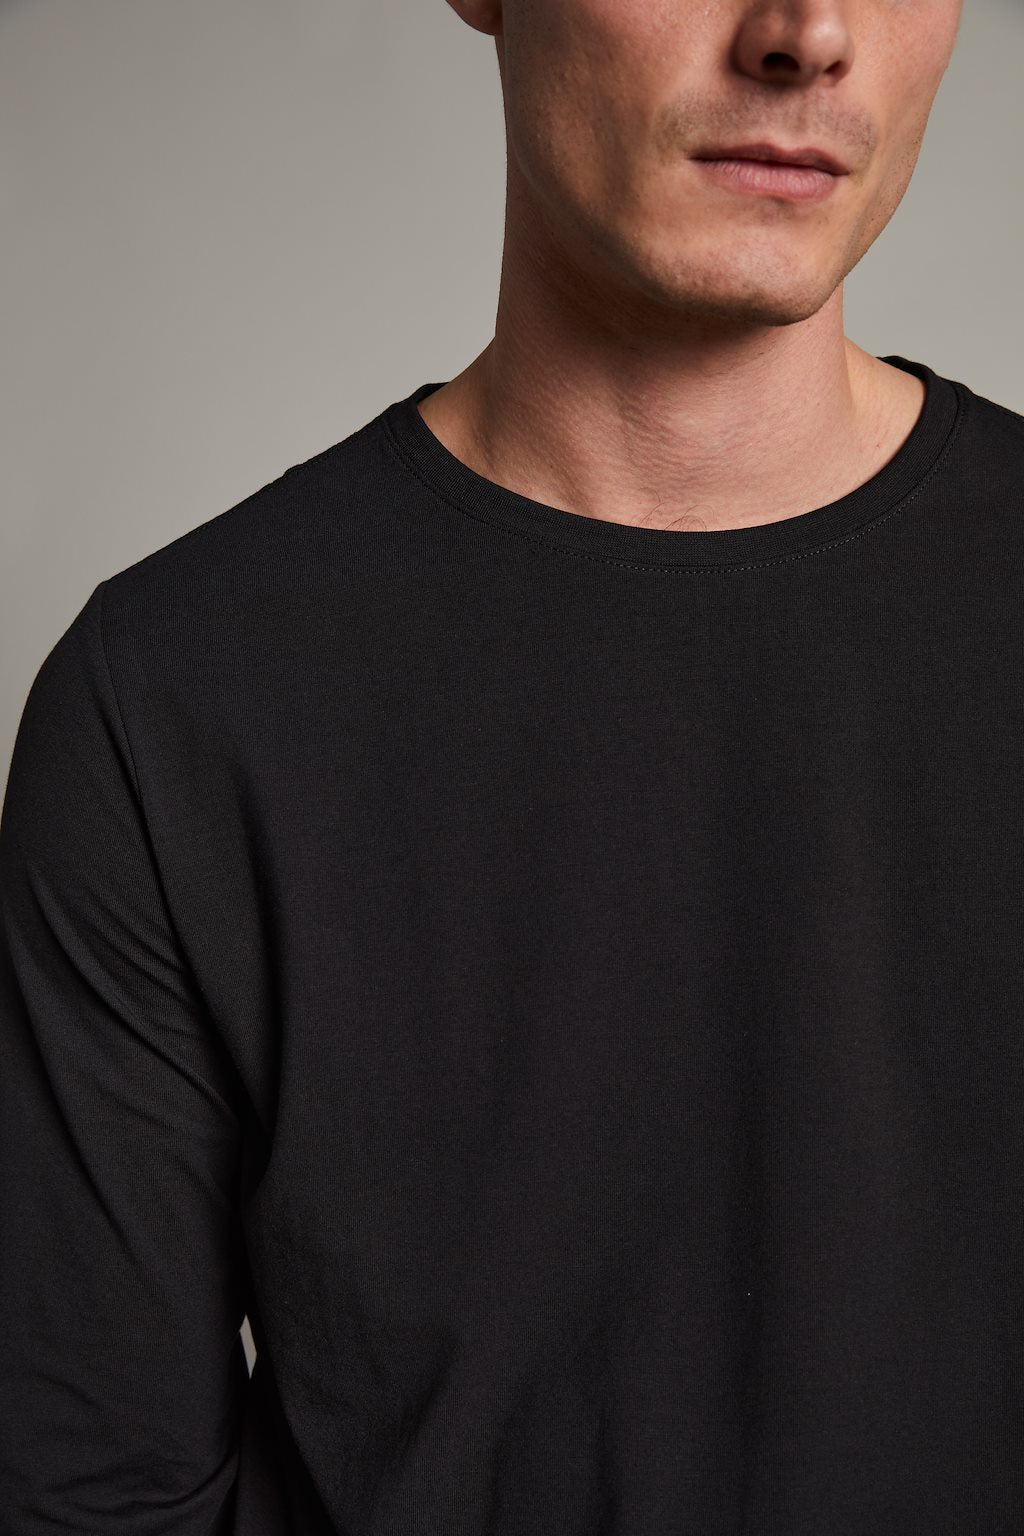 Jermalong Cotton Stretch LS T-Shirt in Black, long sleeve t shirt, men's long sleeve shirt